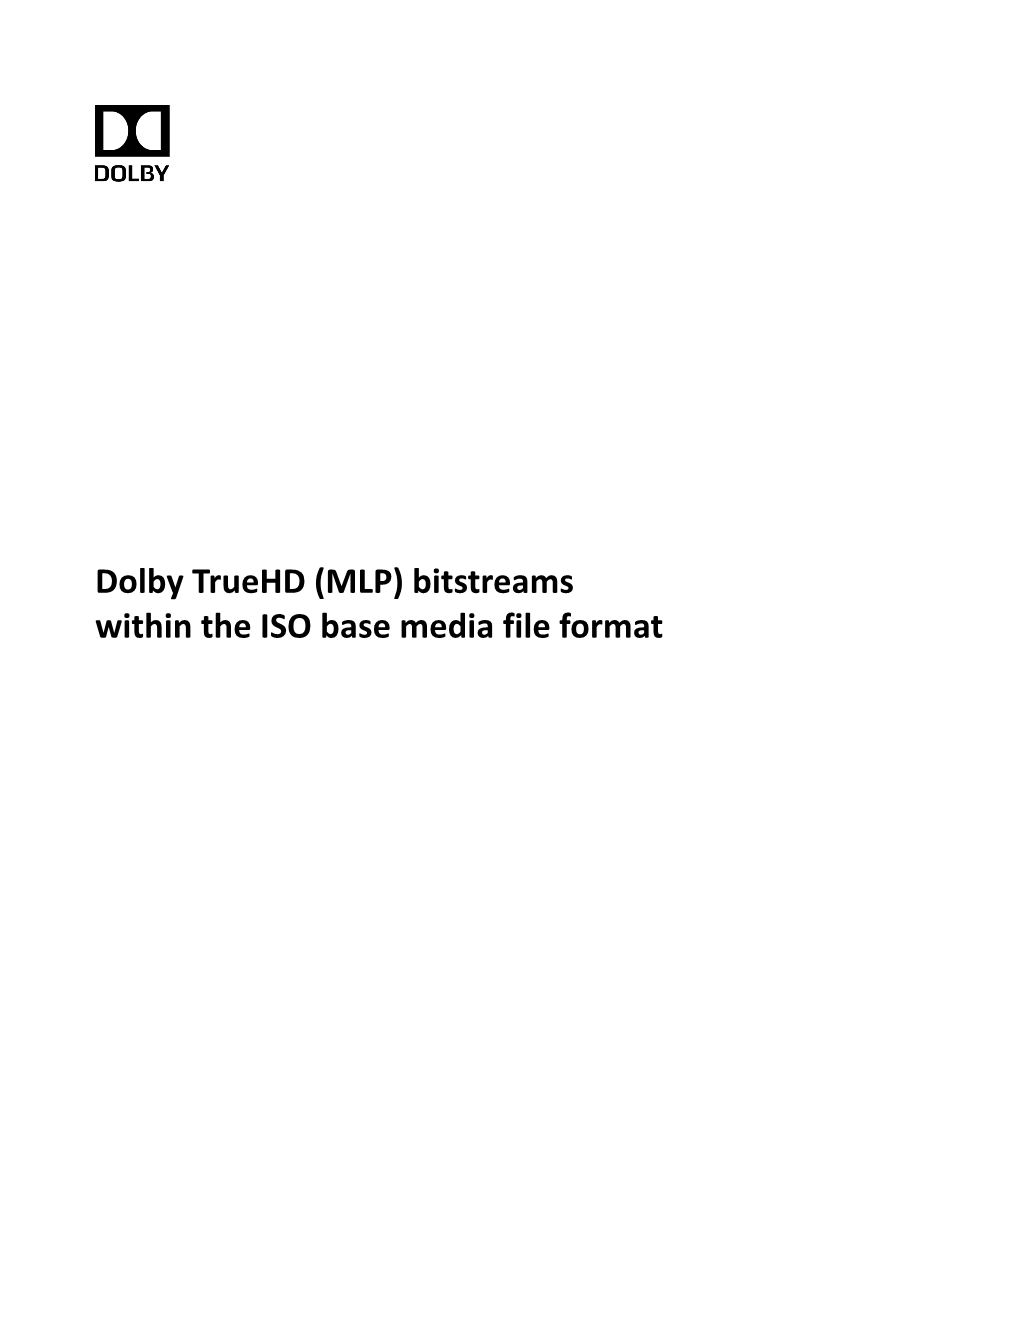 Dolby Truehd (MLP) Bitstreams Within the ISO Base Media File Format